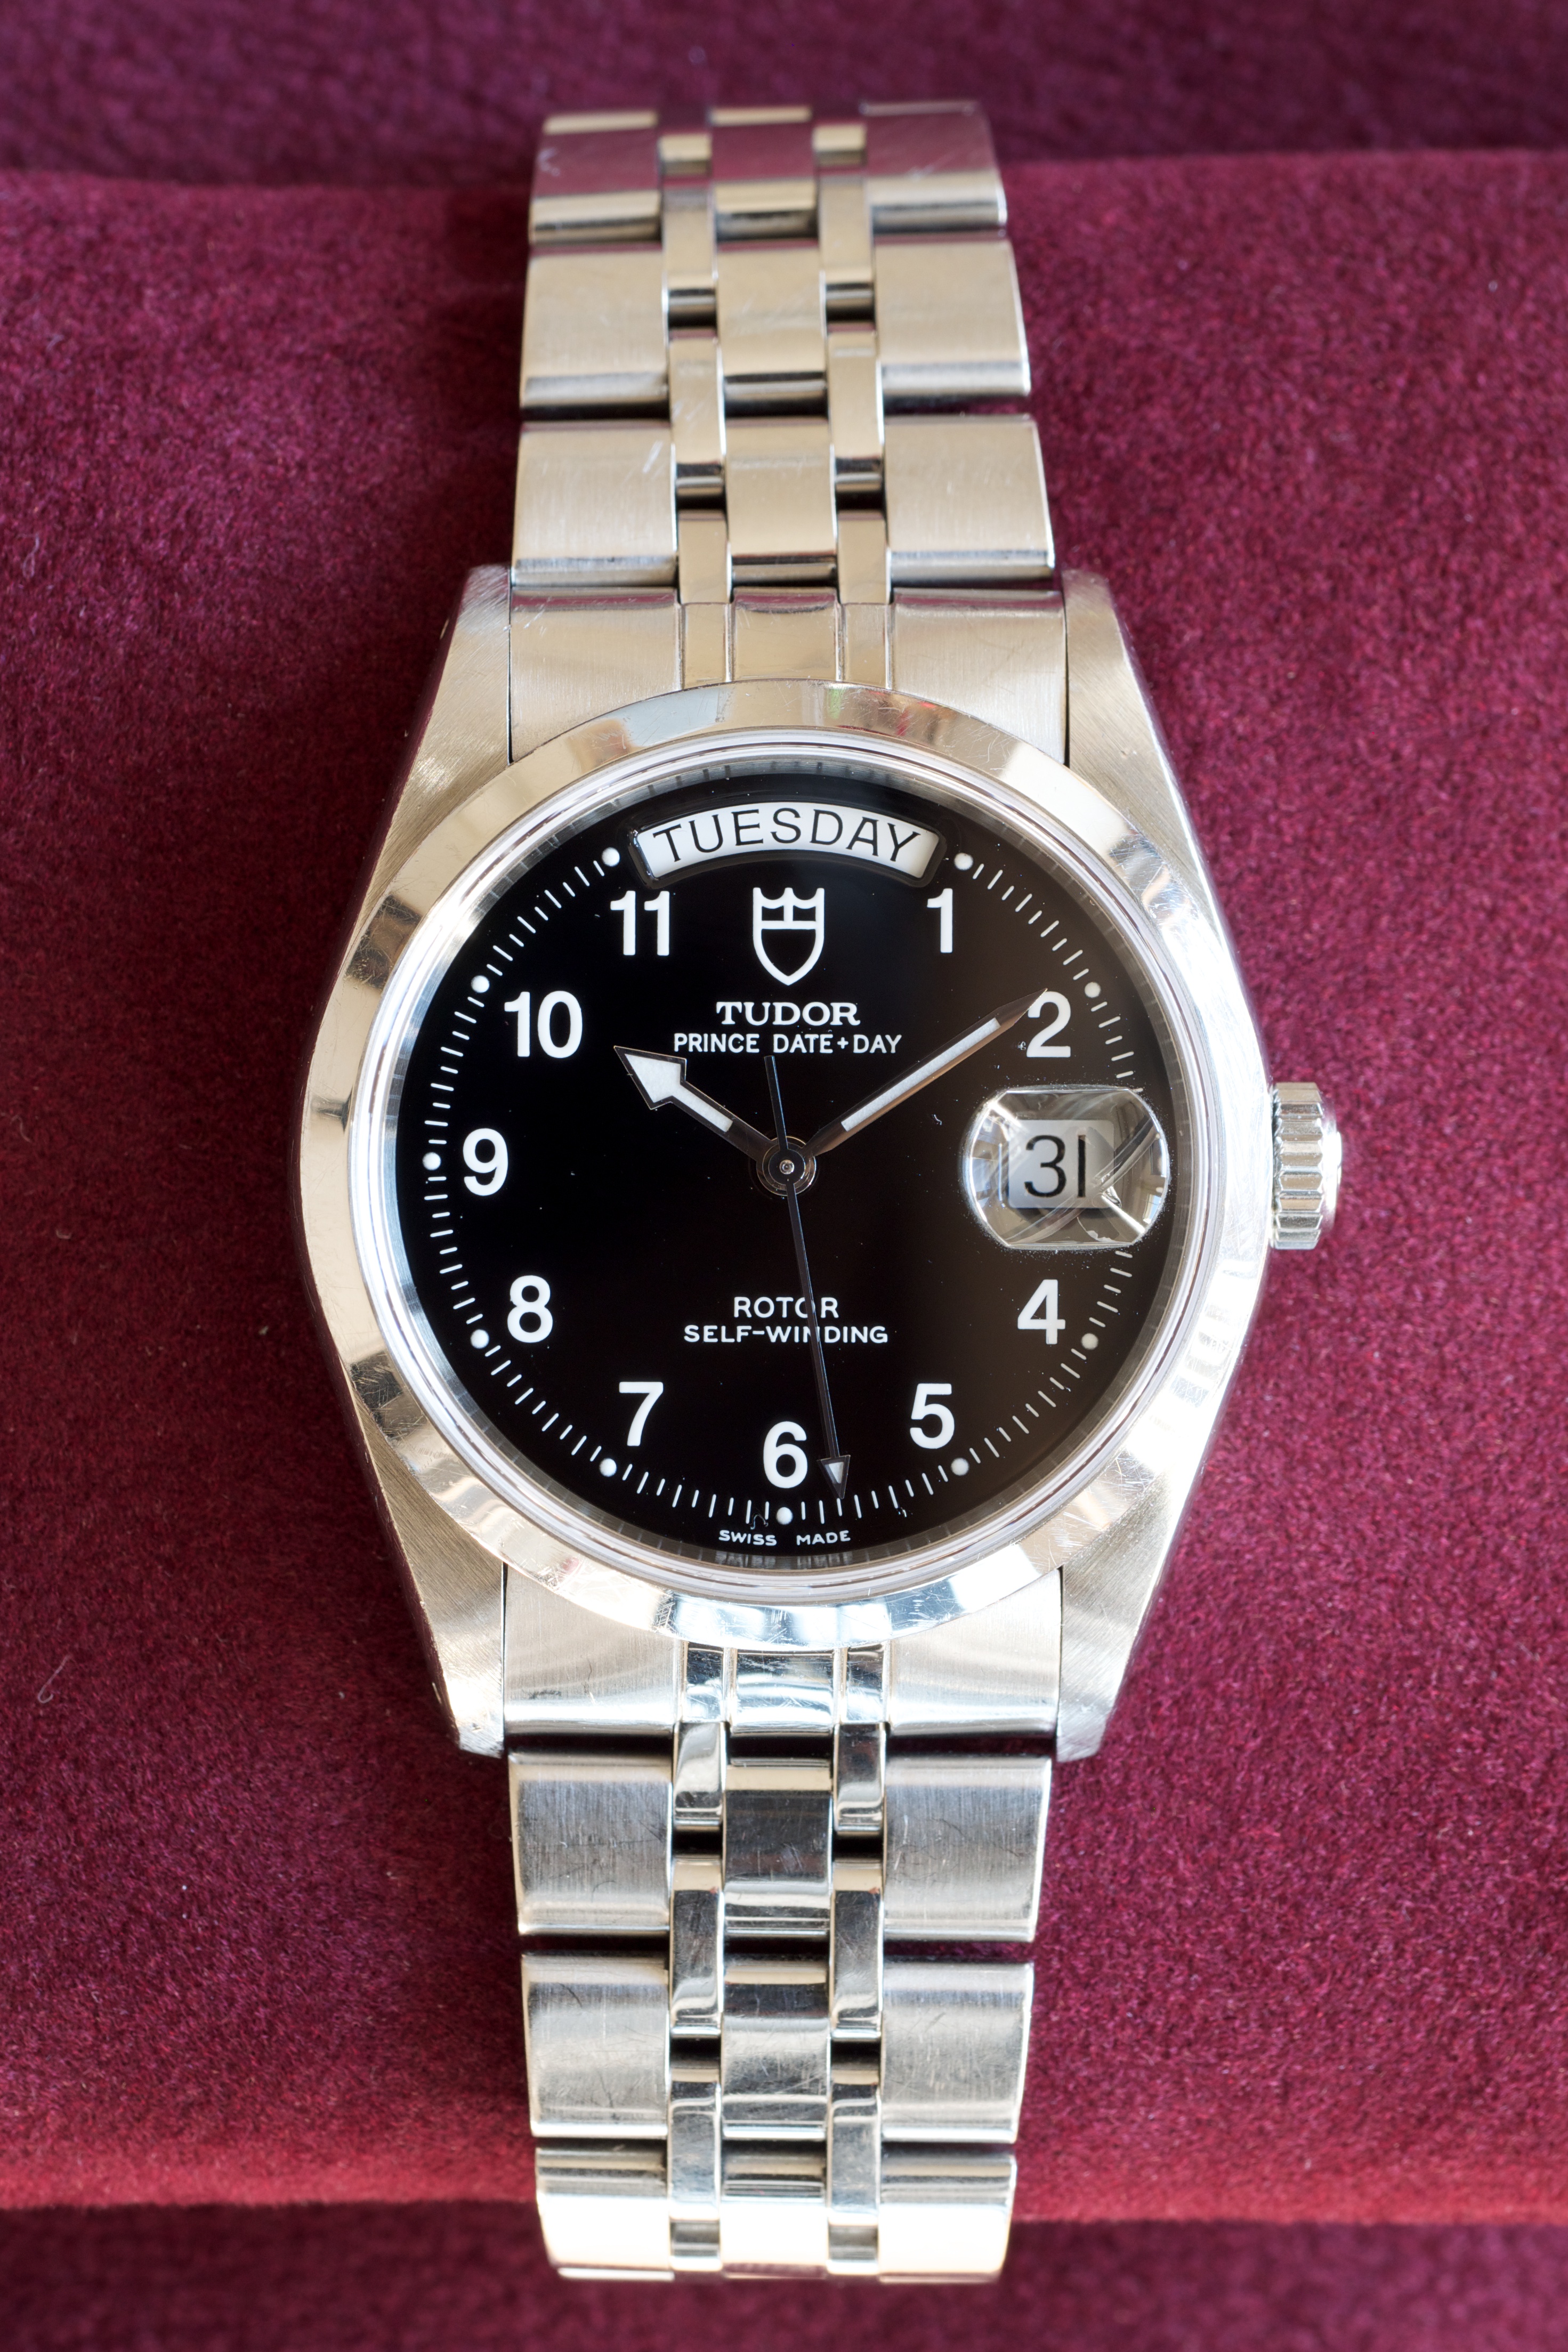 Rolex SA offers products under the Rolex and Tudor brands.